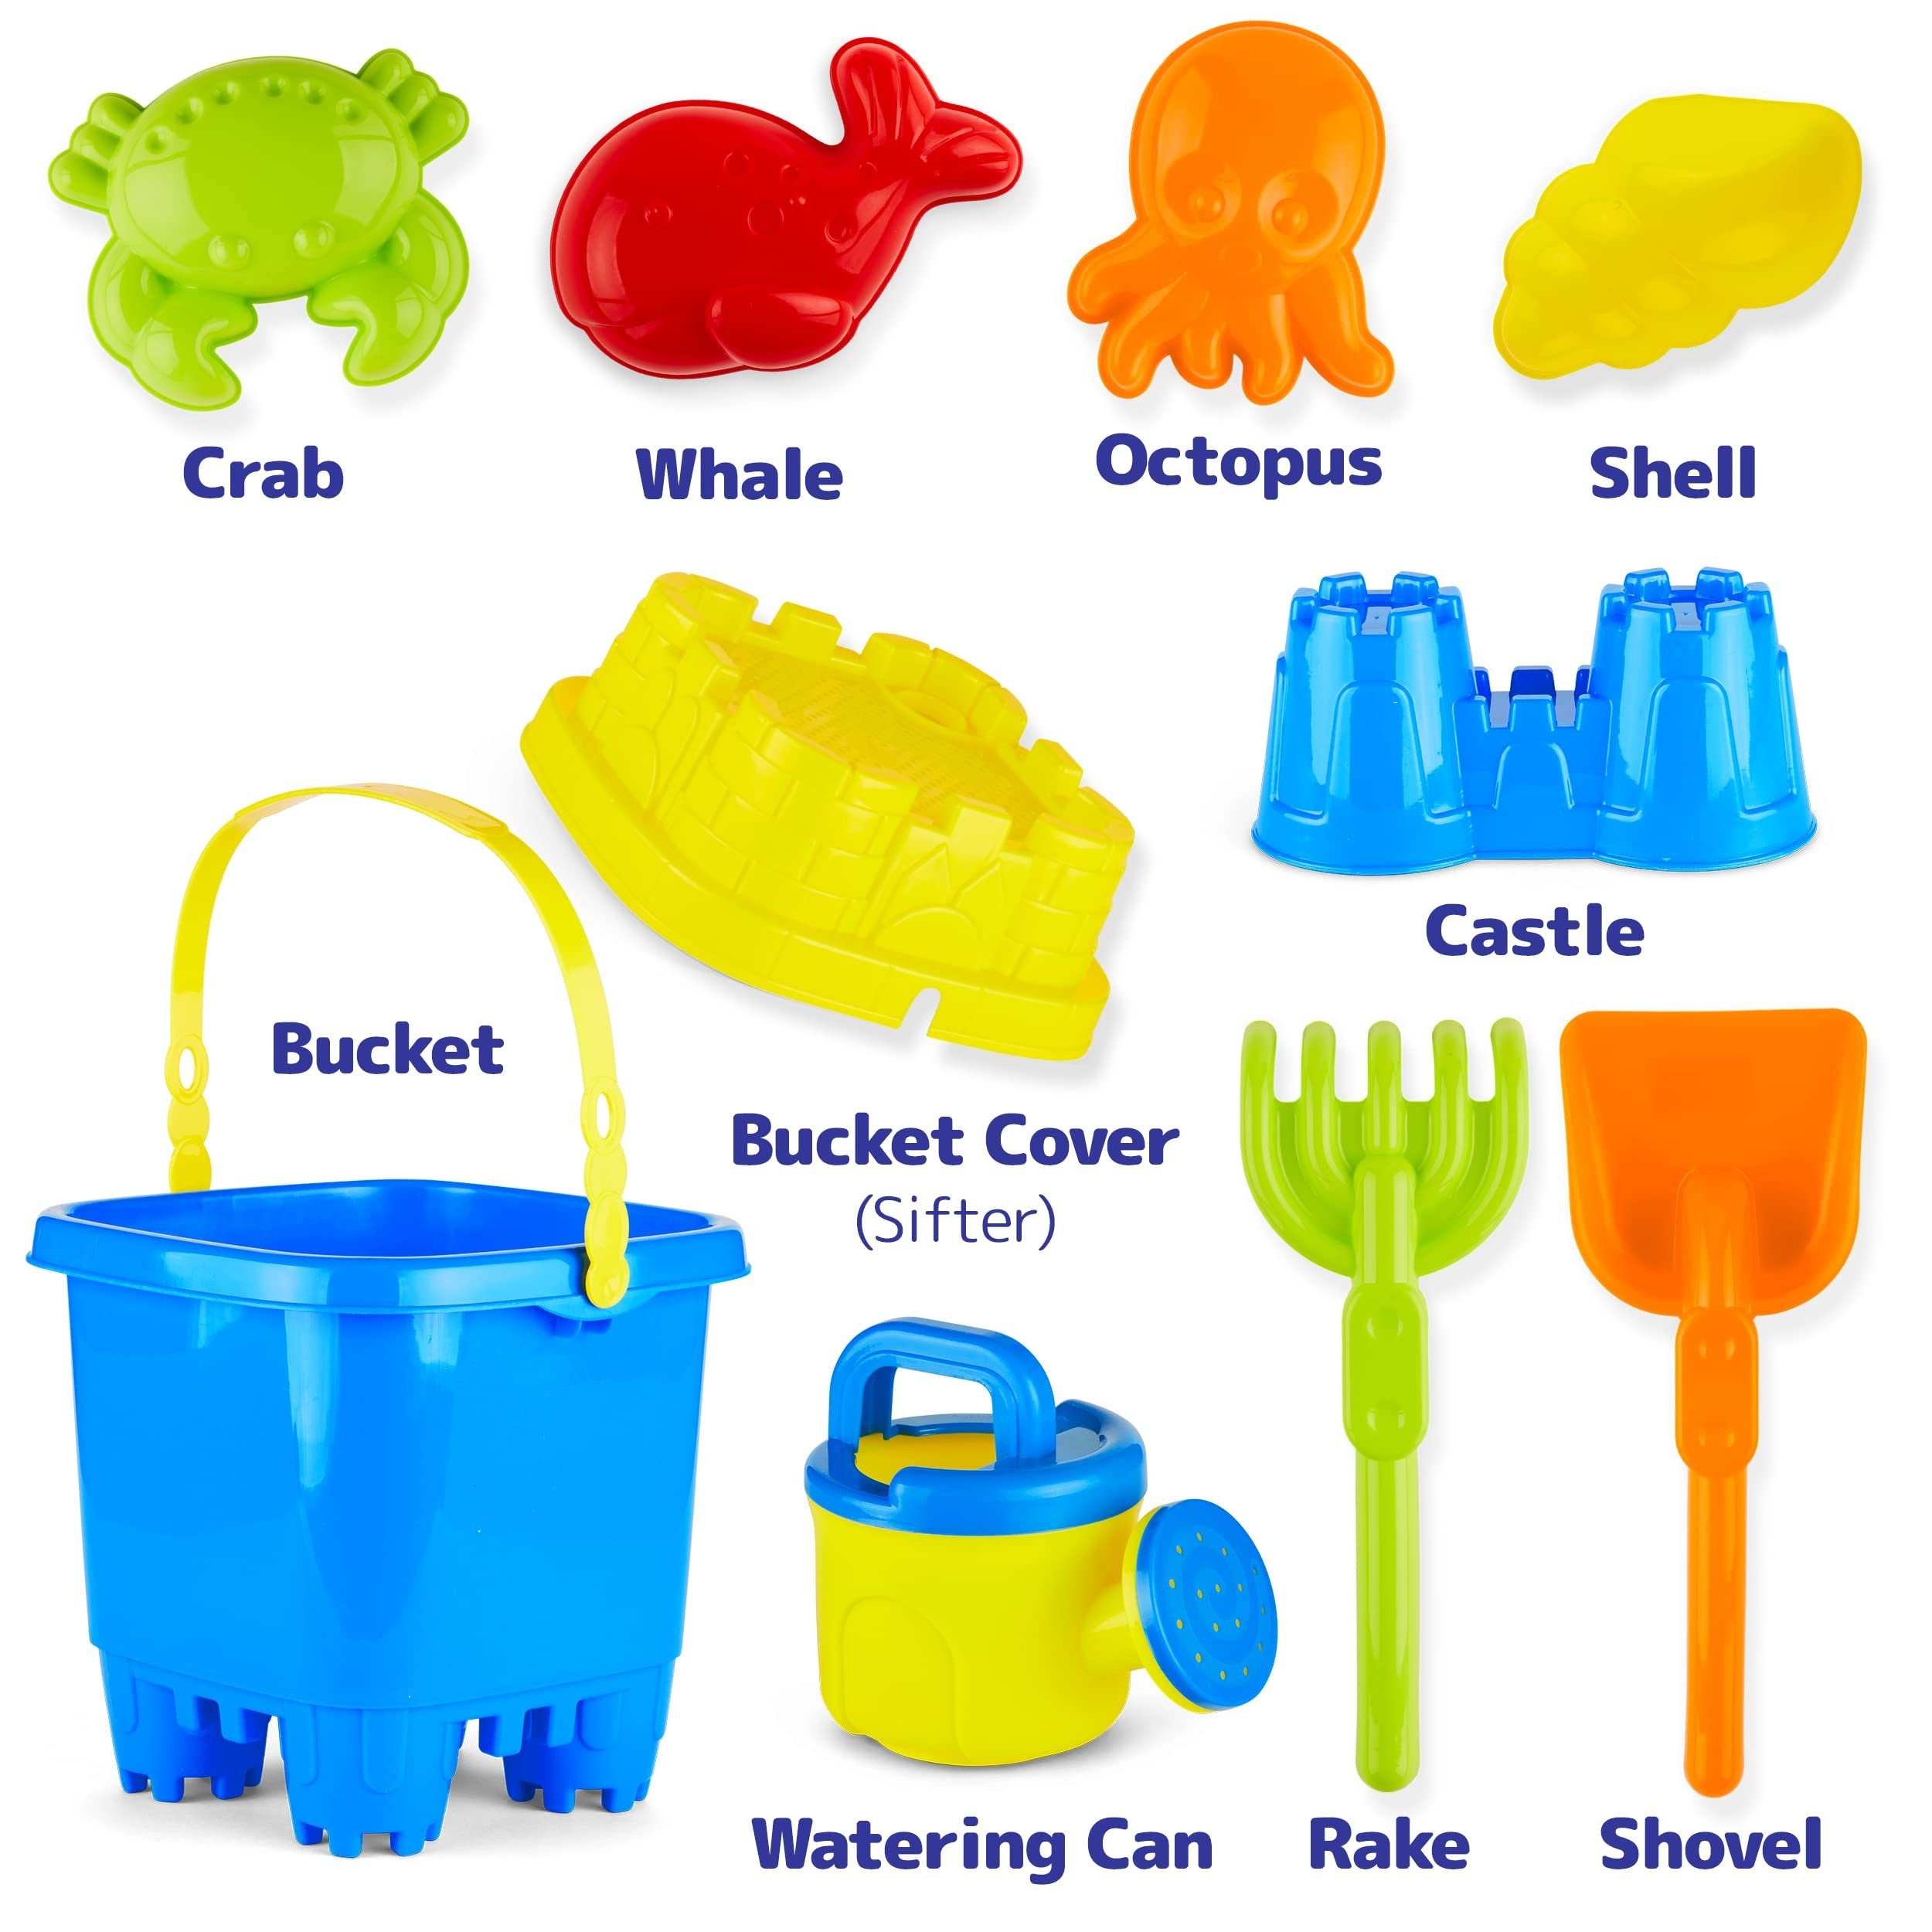 PREXTEX 10 Piece Beach Sand Toys Set for Kids - Bucket with Sifter, Shovel, Rake, Watering Can, 5 Animal and Castle Sand Molds for Kids & Toddlers - Sand Buckets and Shovels for Kids, Beach Toy Set